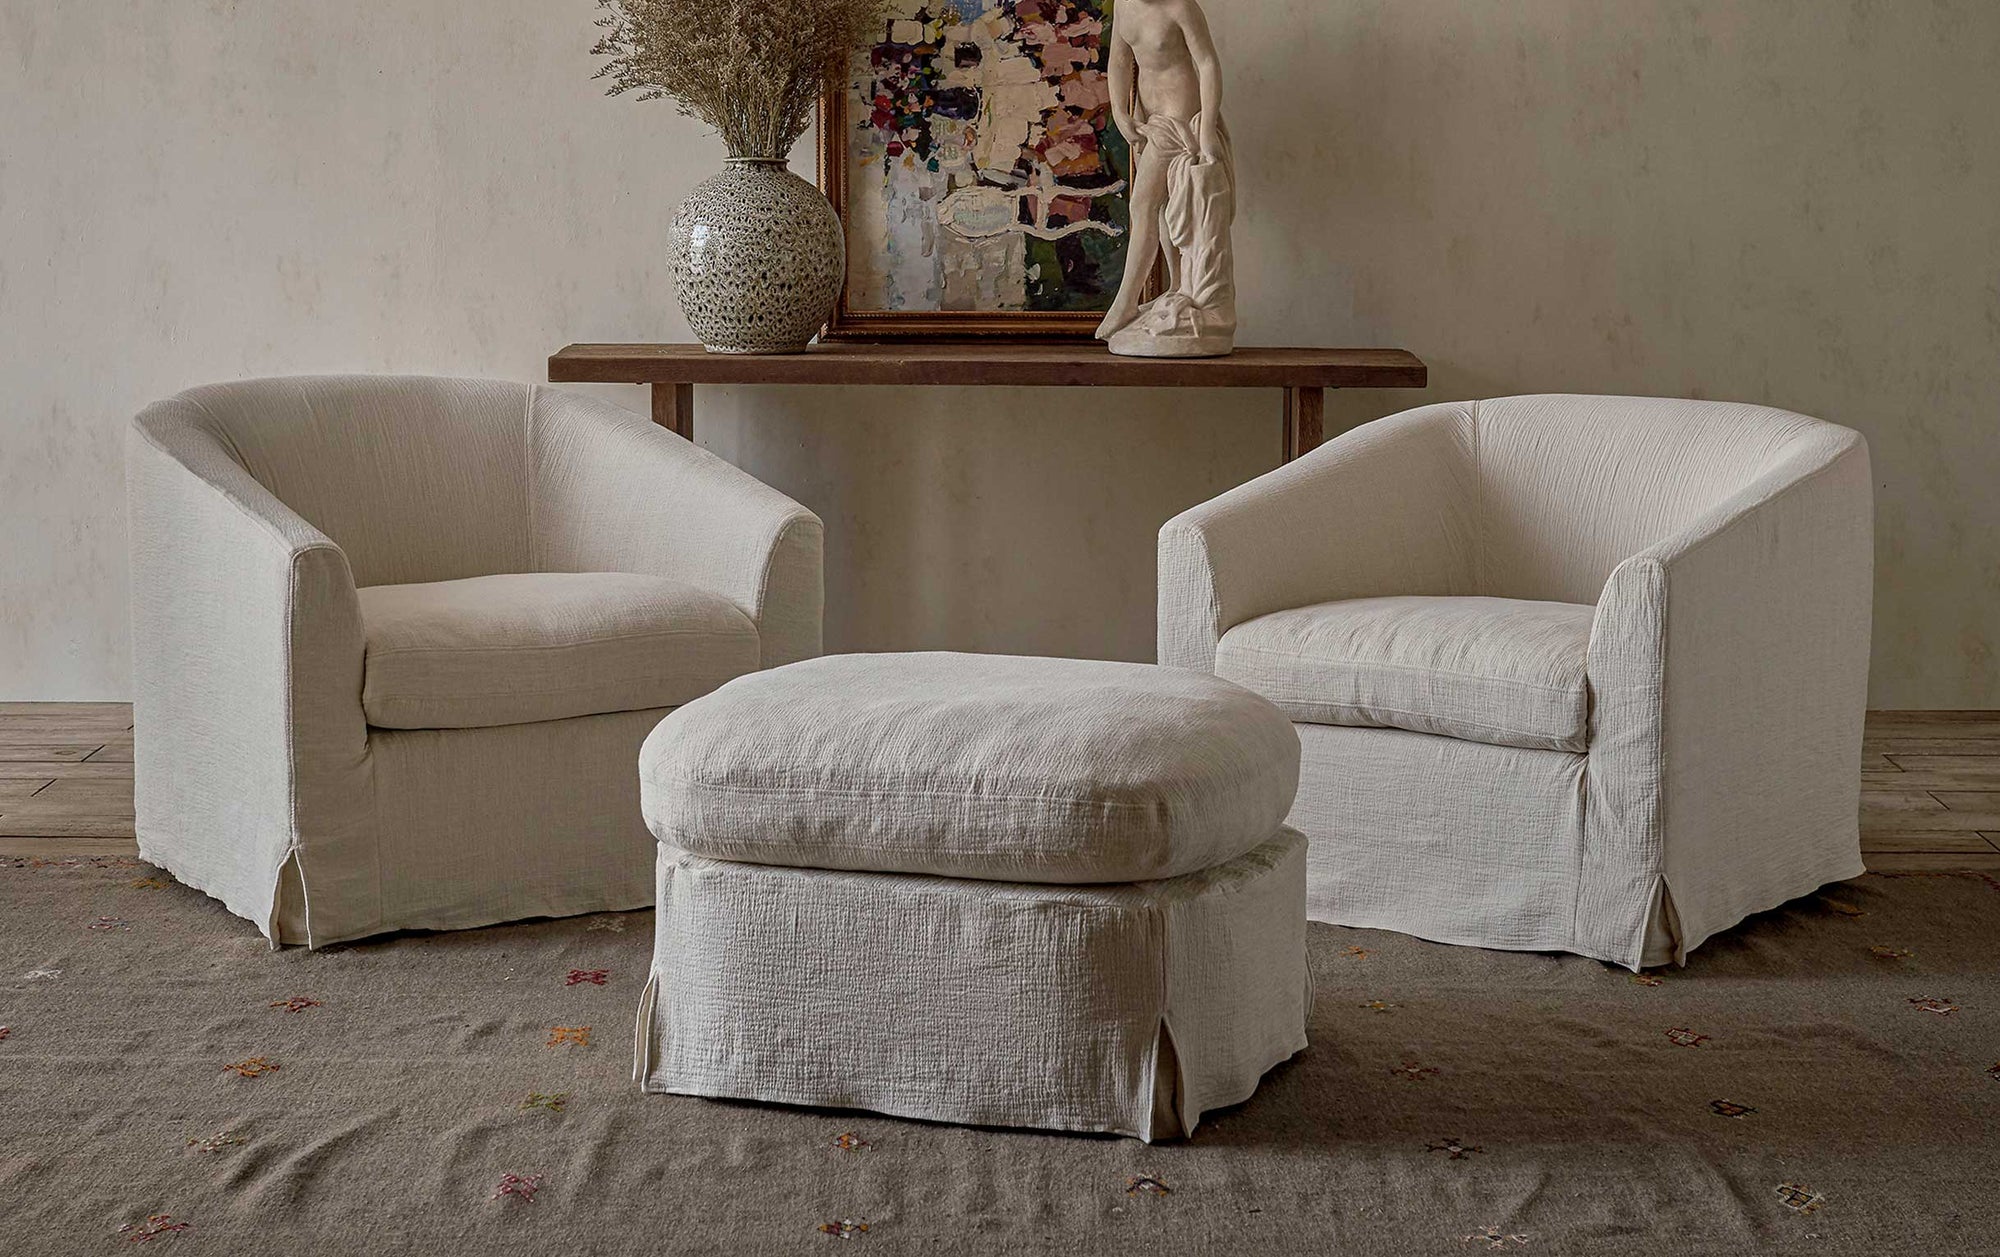 Ziki Chair Ottoman in Corn Silk, a light beige Washed Cotton Linen, placed in a room between two Ziki Chairs